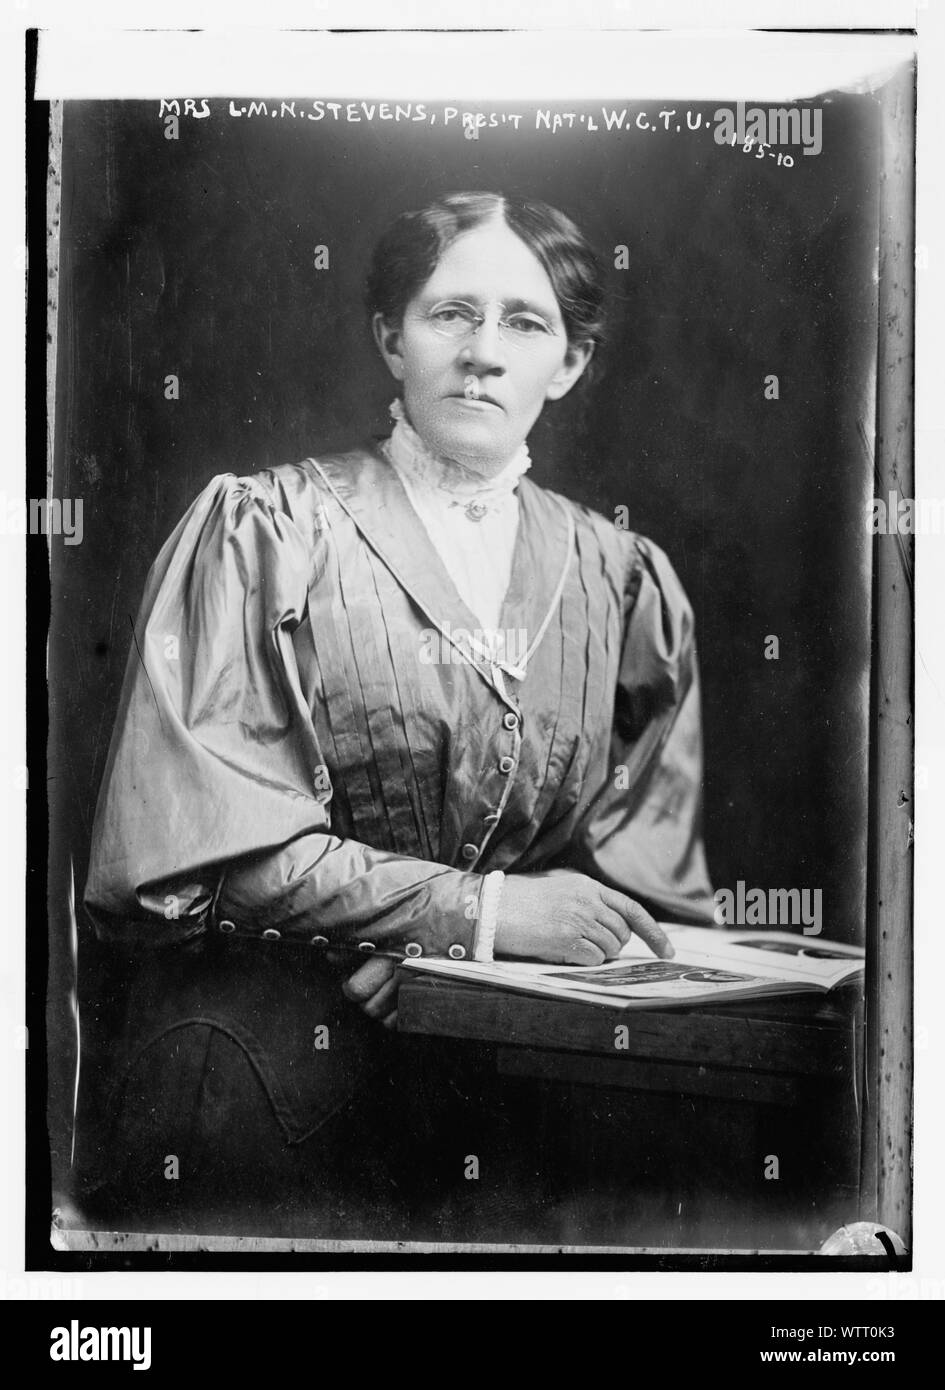 Mrs. L.M.N. Stevens, President of Nat'l W.C.T. U. seated with book Stock Photo